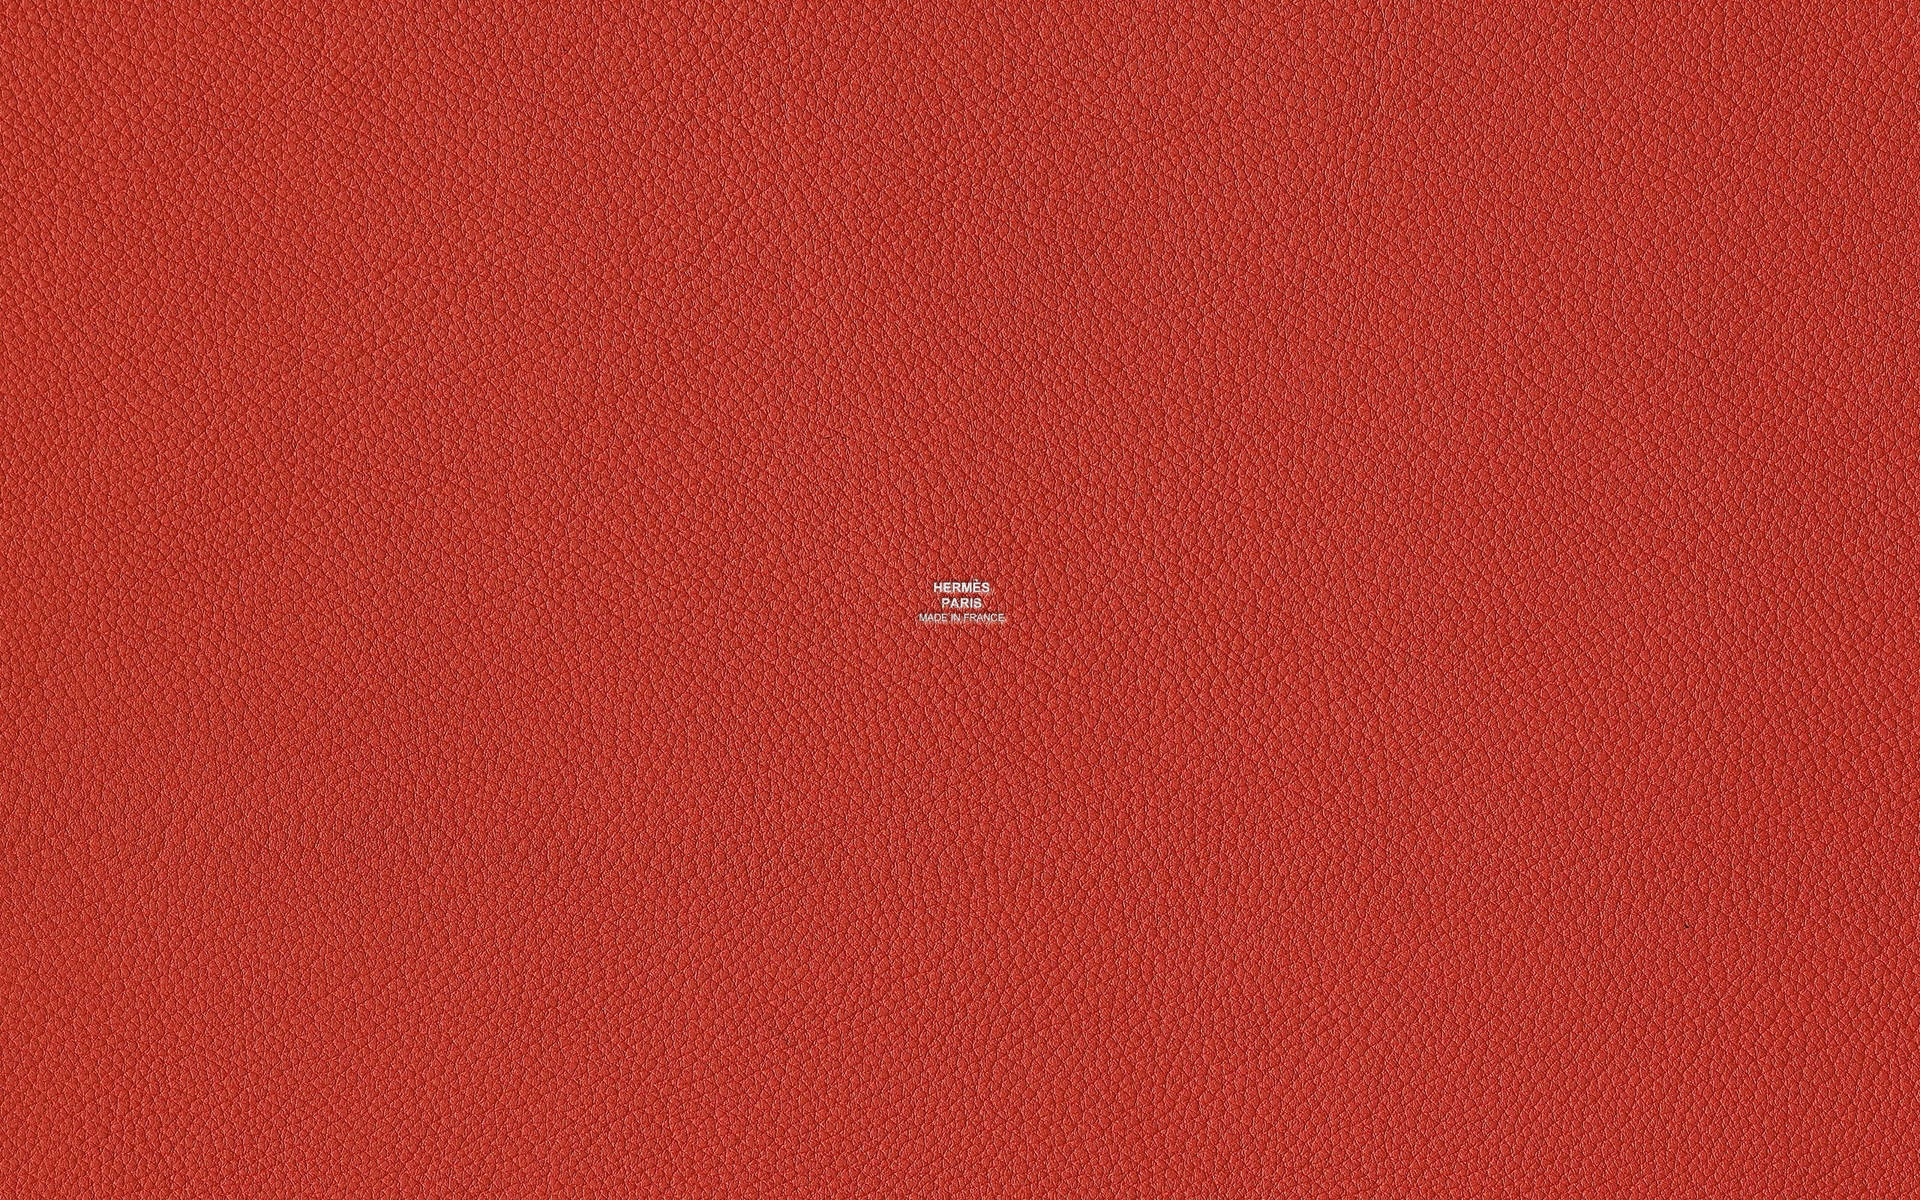 Red Textured Hermes Background